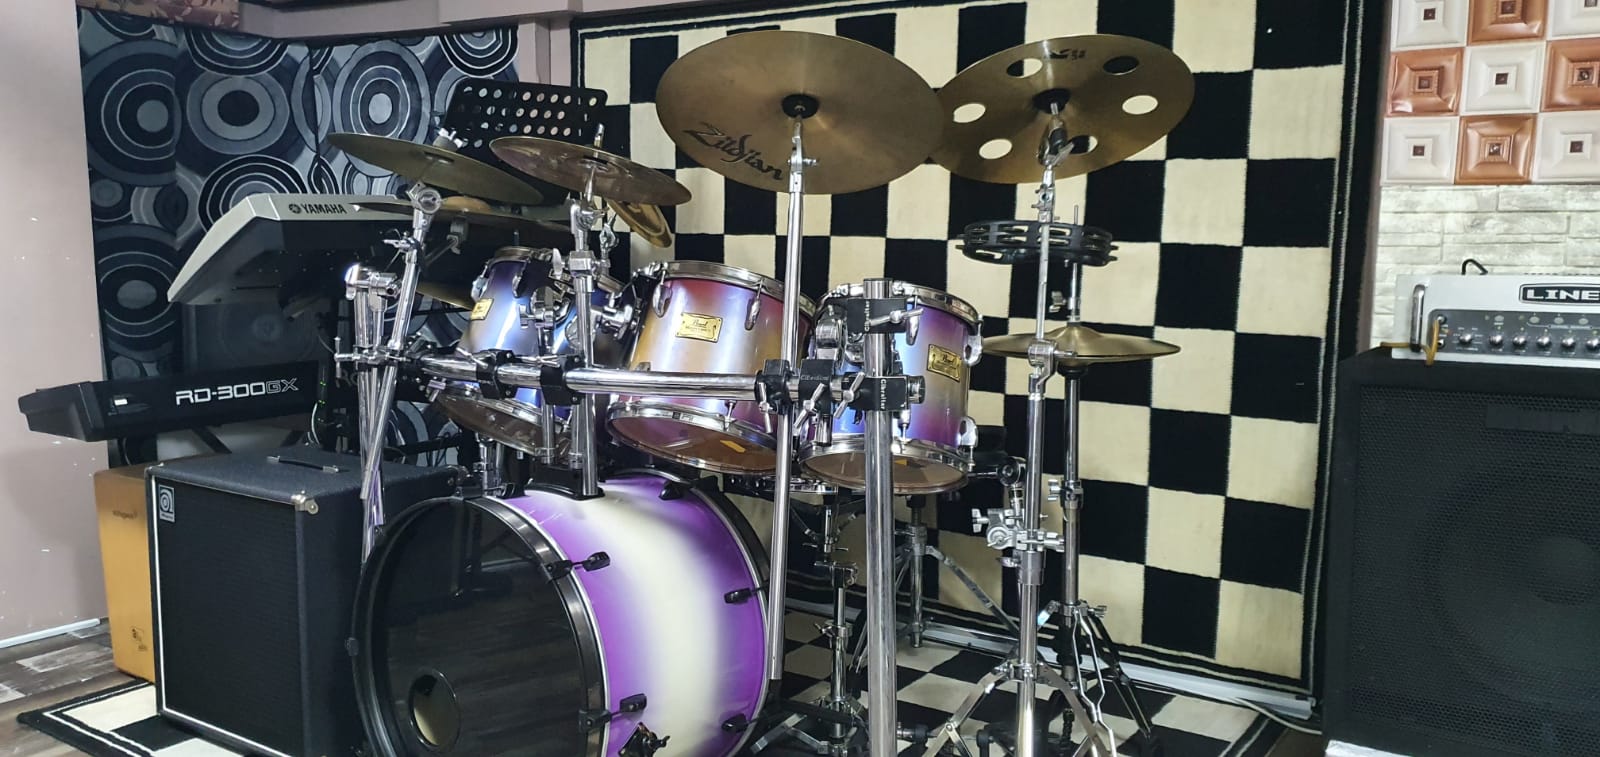 bmic promotion cheapest most affordable studio 7 days a week in singapore. Comes with Drum sets guitars, amplifiers, microphones and an amazing sound system